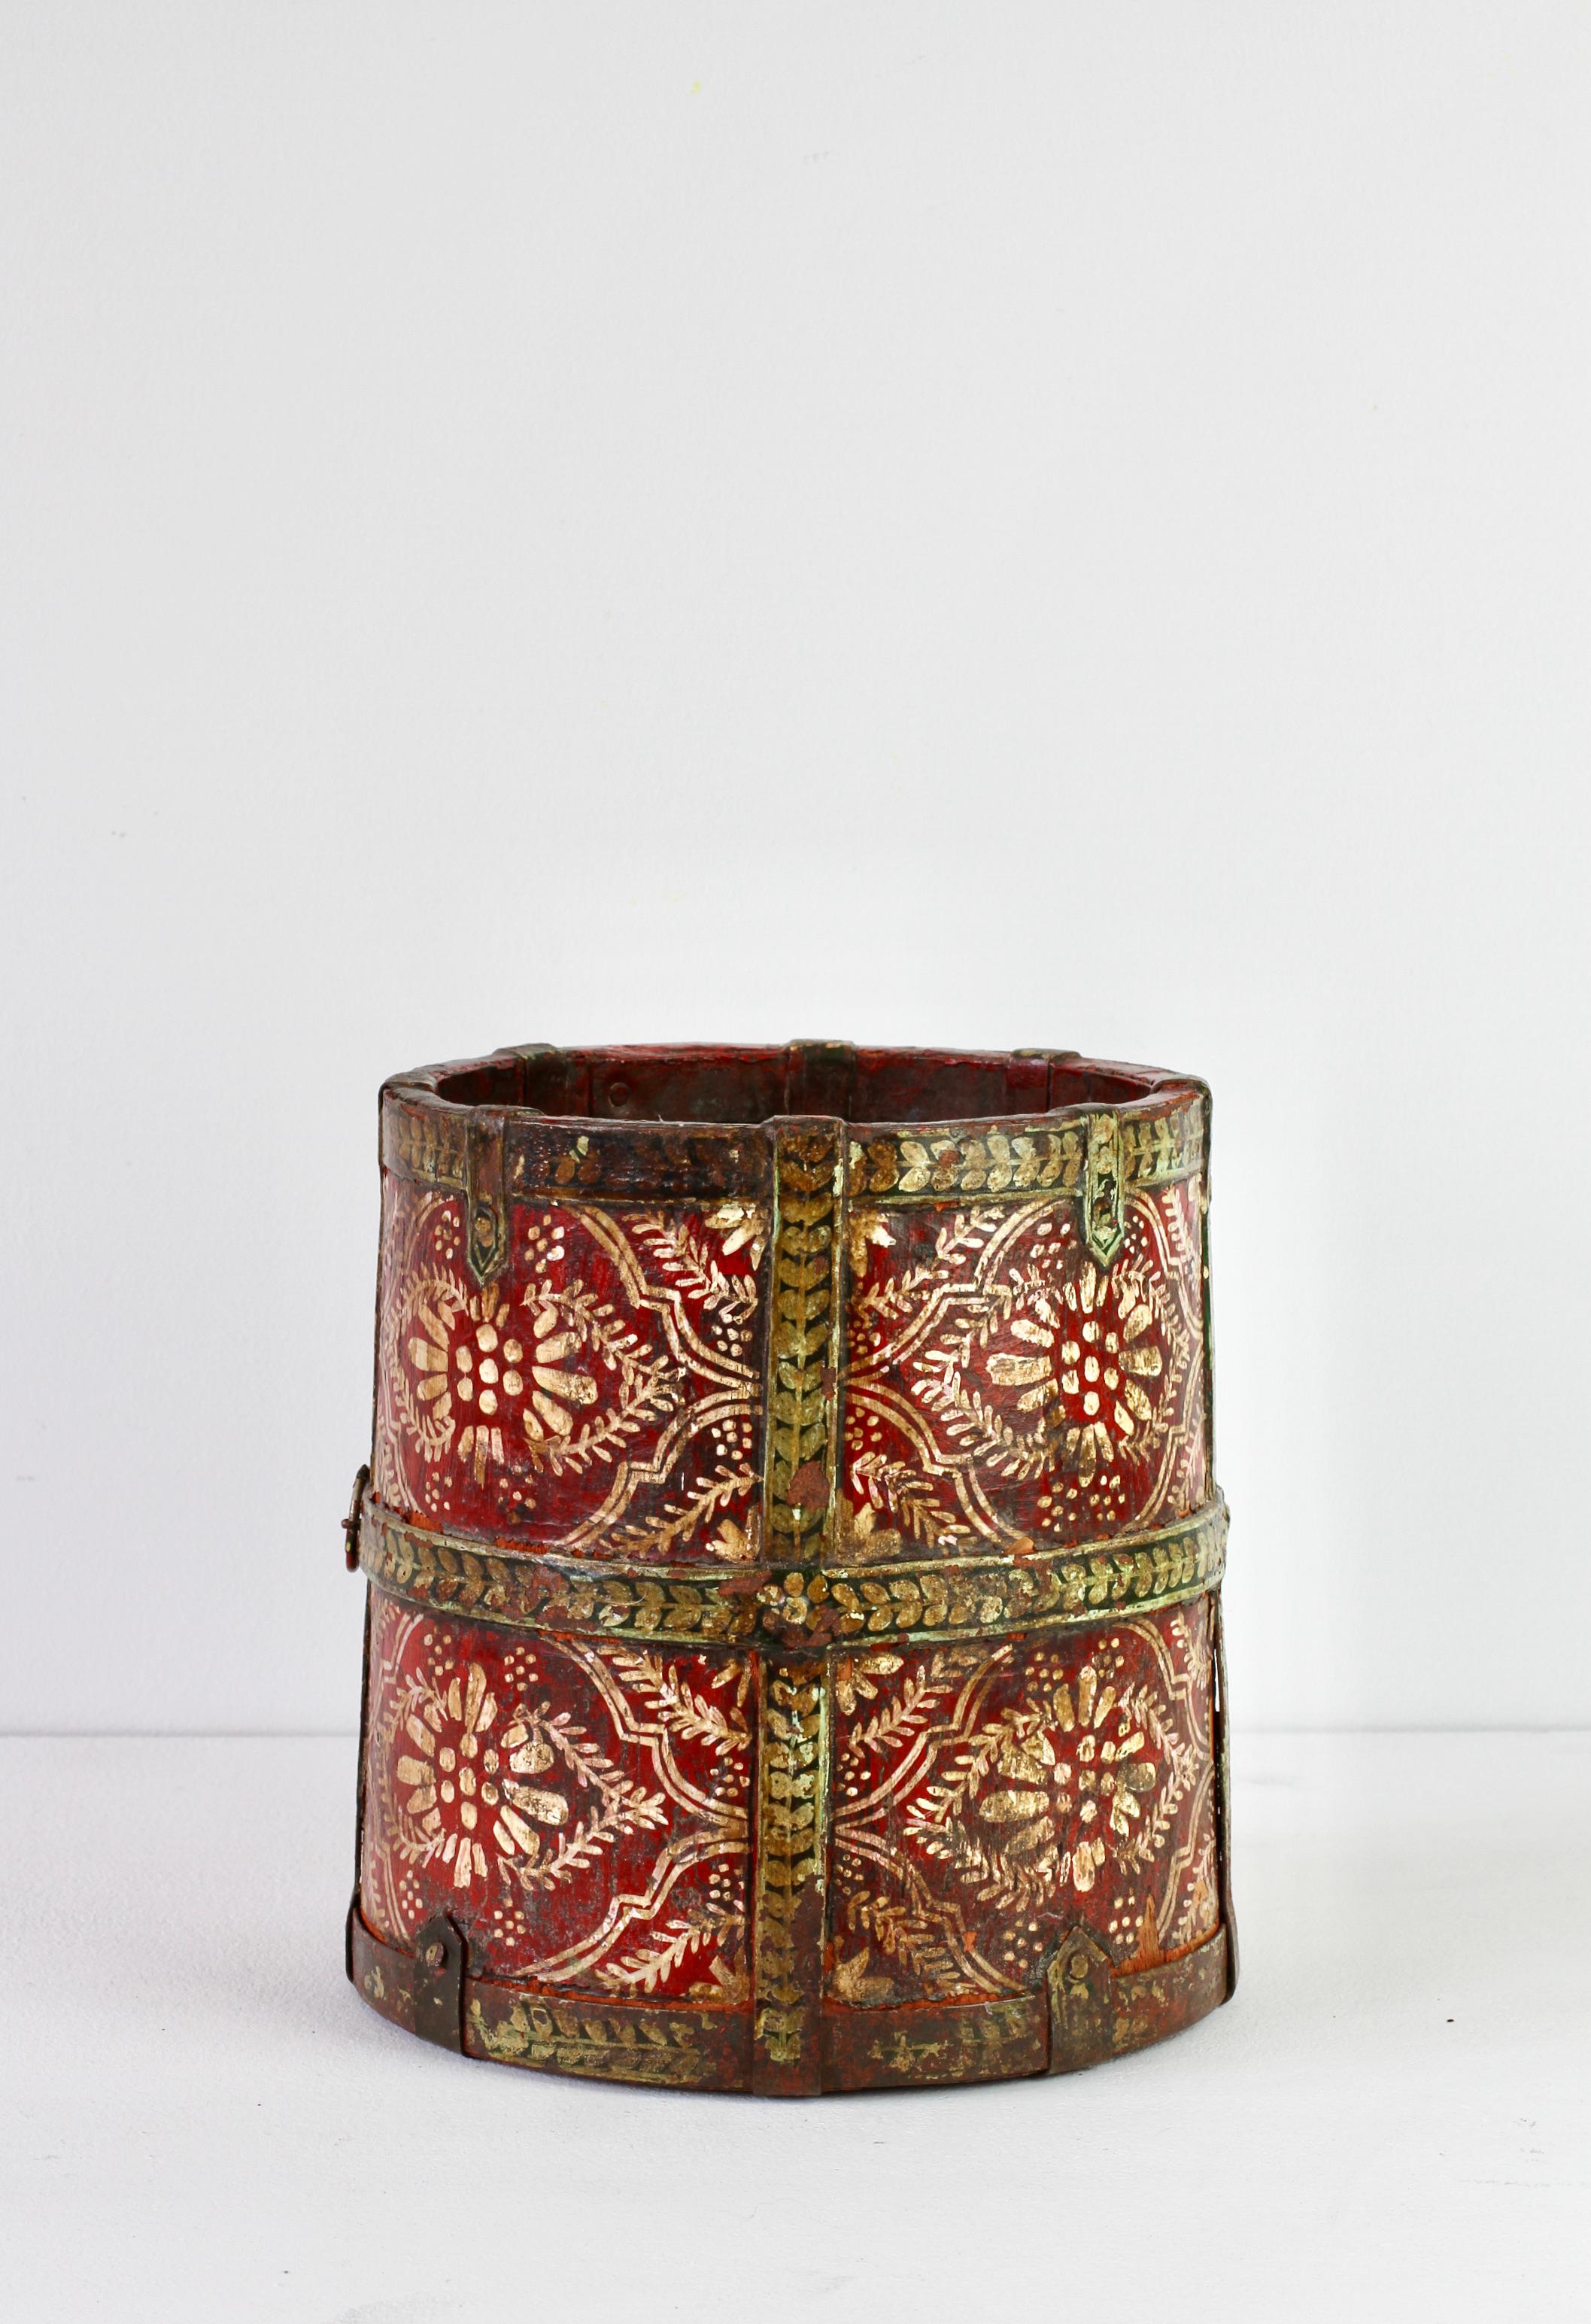 Really beautifully hand painted antique wooden bucket or furkil. Probably Scandinavian / European in origin and made of oak staves and wrought iron, circa 1850. We absolutely love the off white hand-painted decorations over the red base and the gold